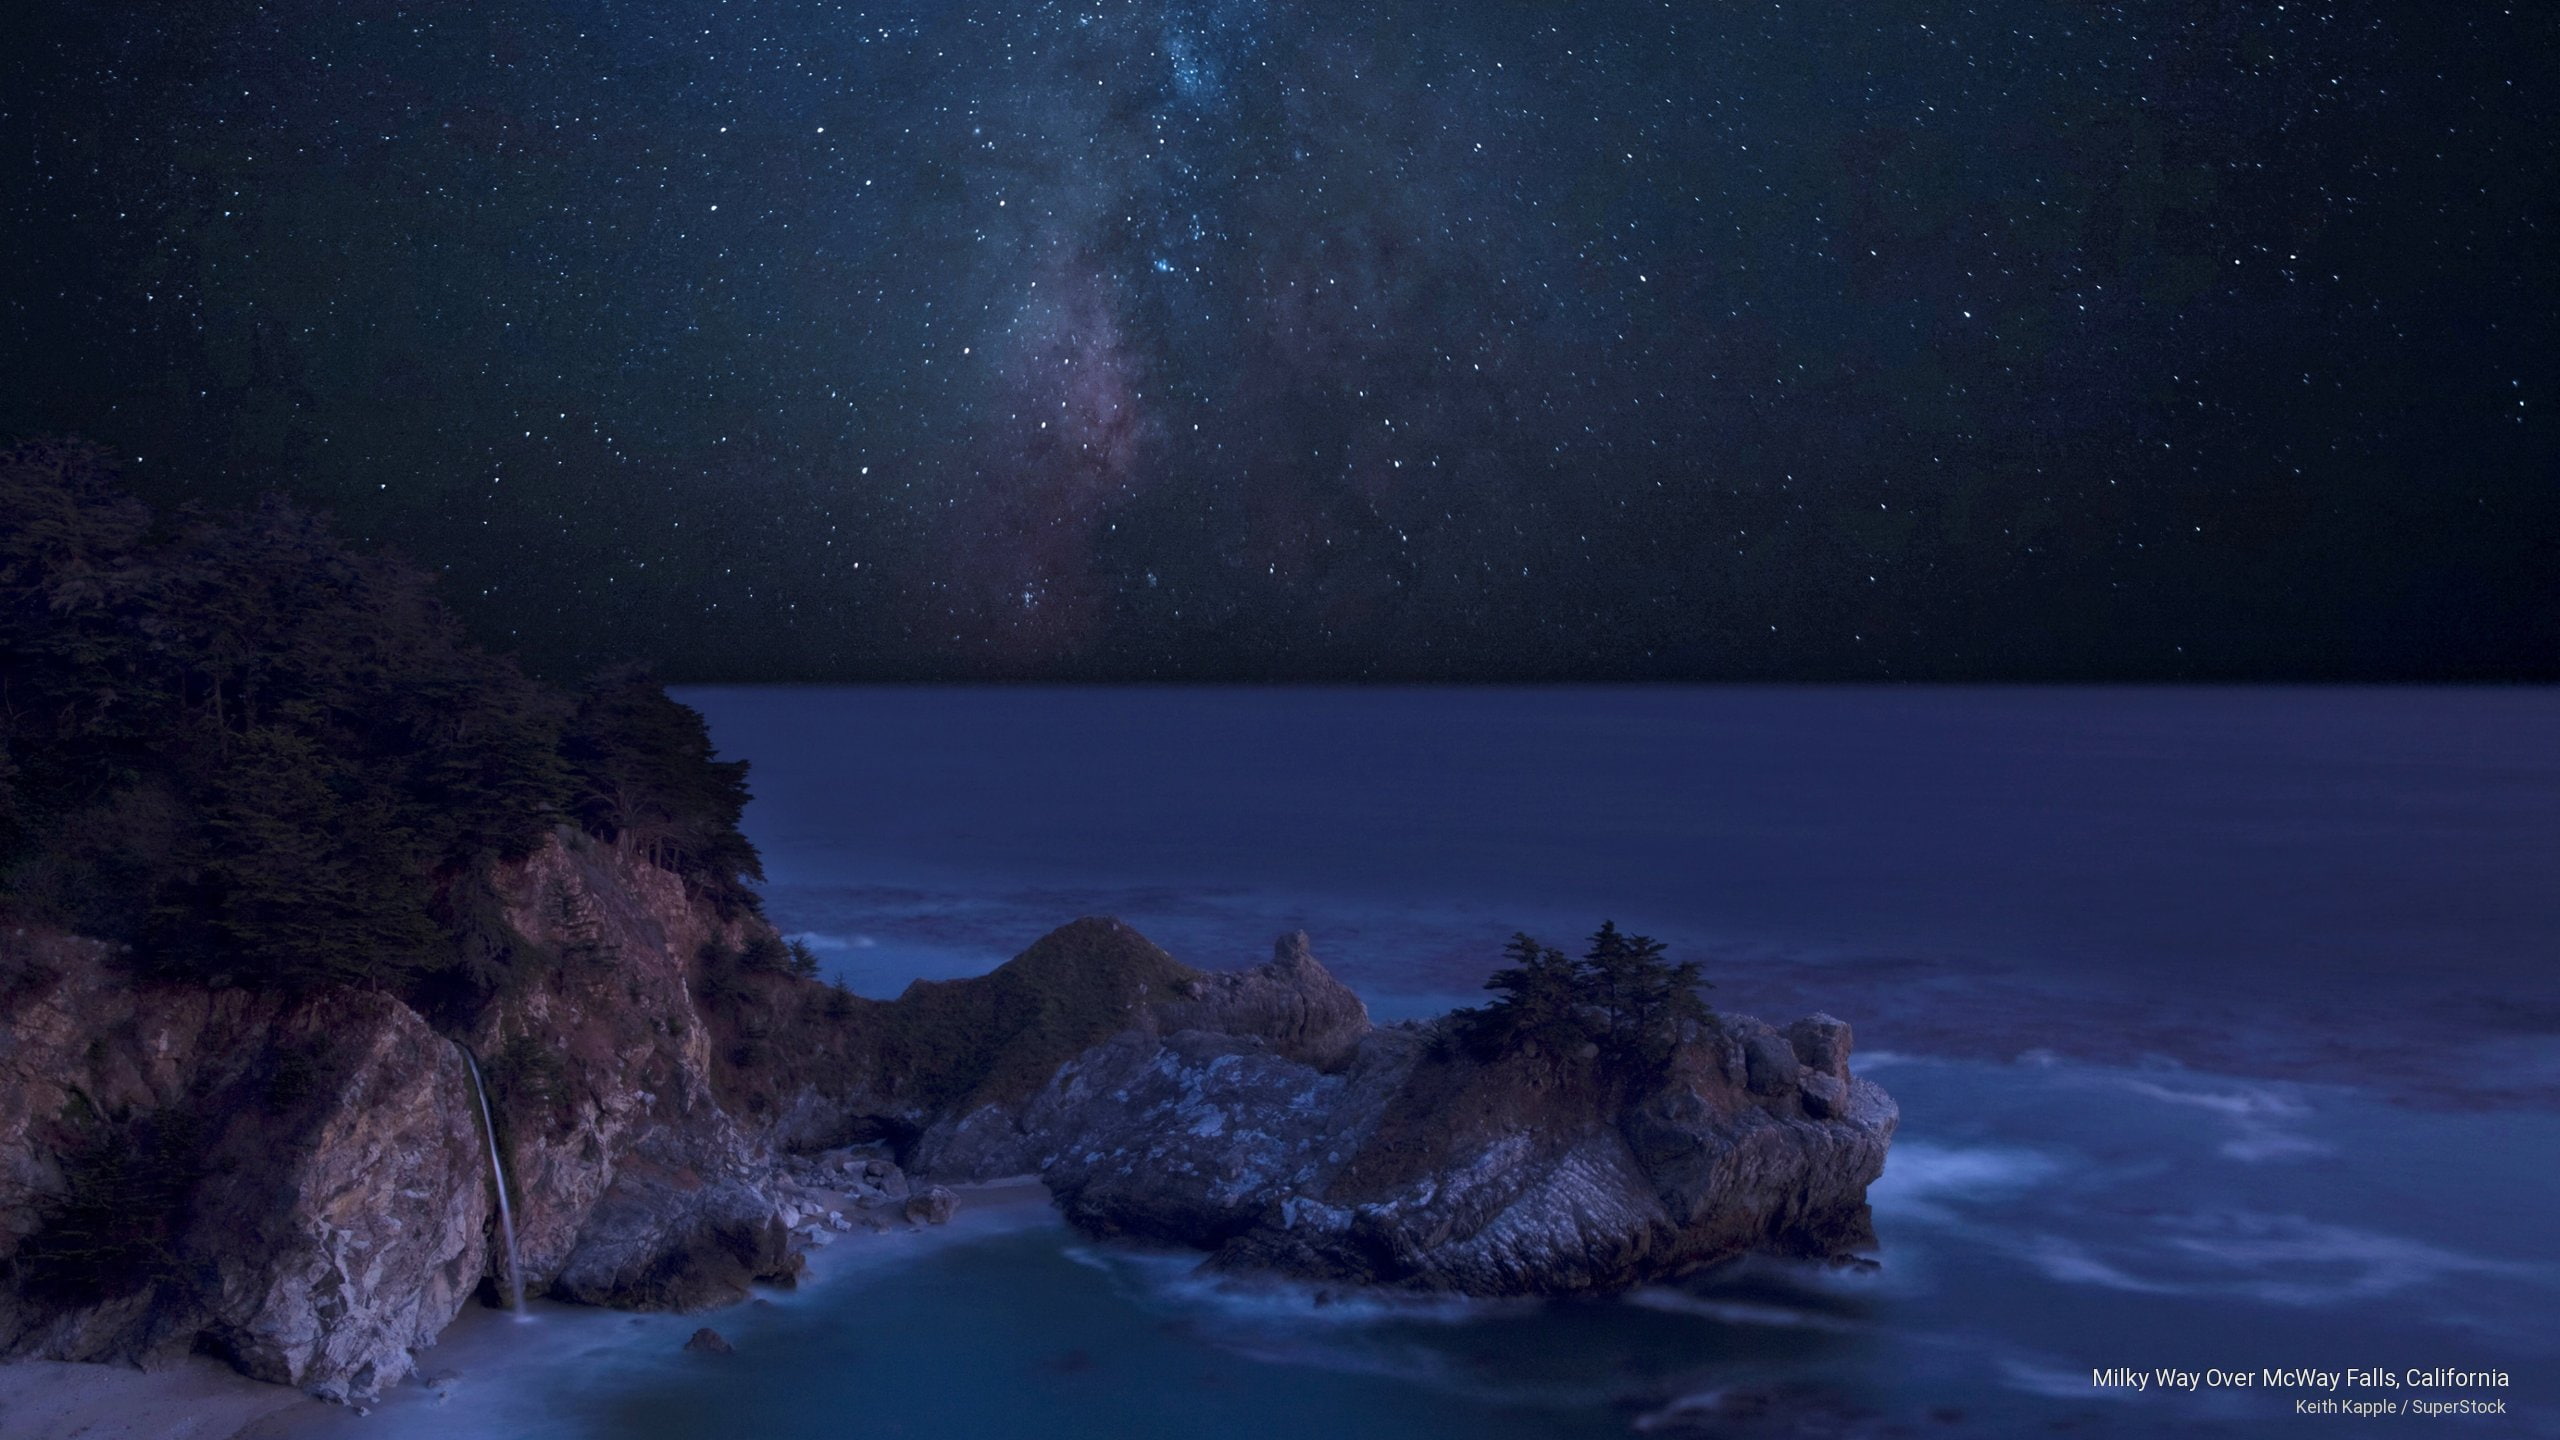 Milky Way Over McWay Falls, California, Beaches